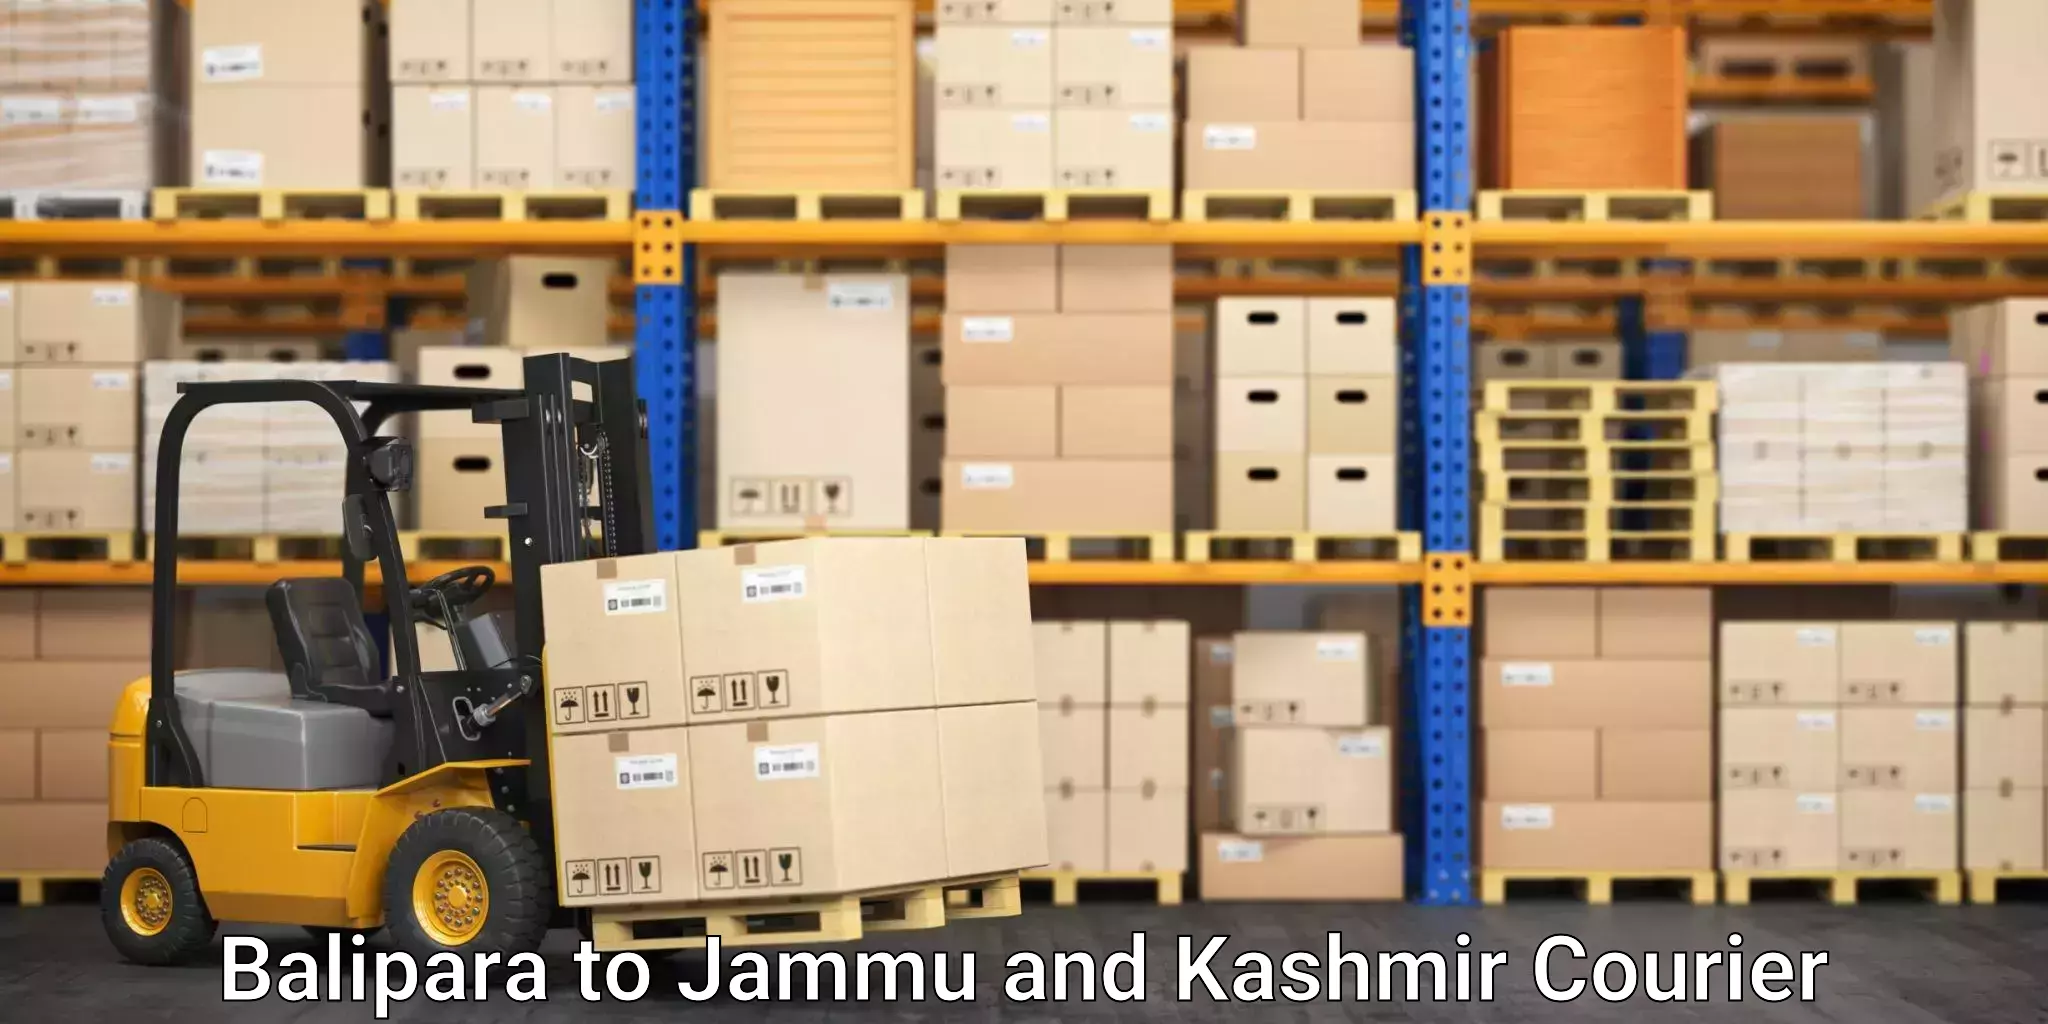 High-capacity courier solutions Balipara to Jammu and Kashmir